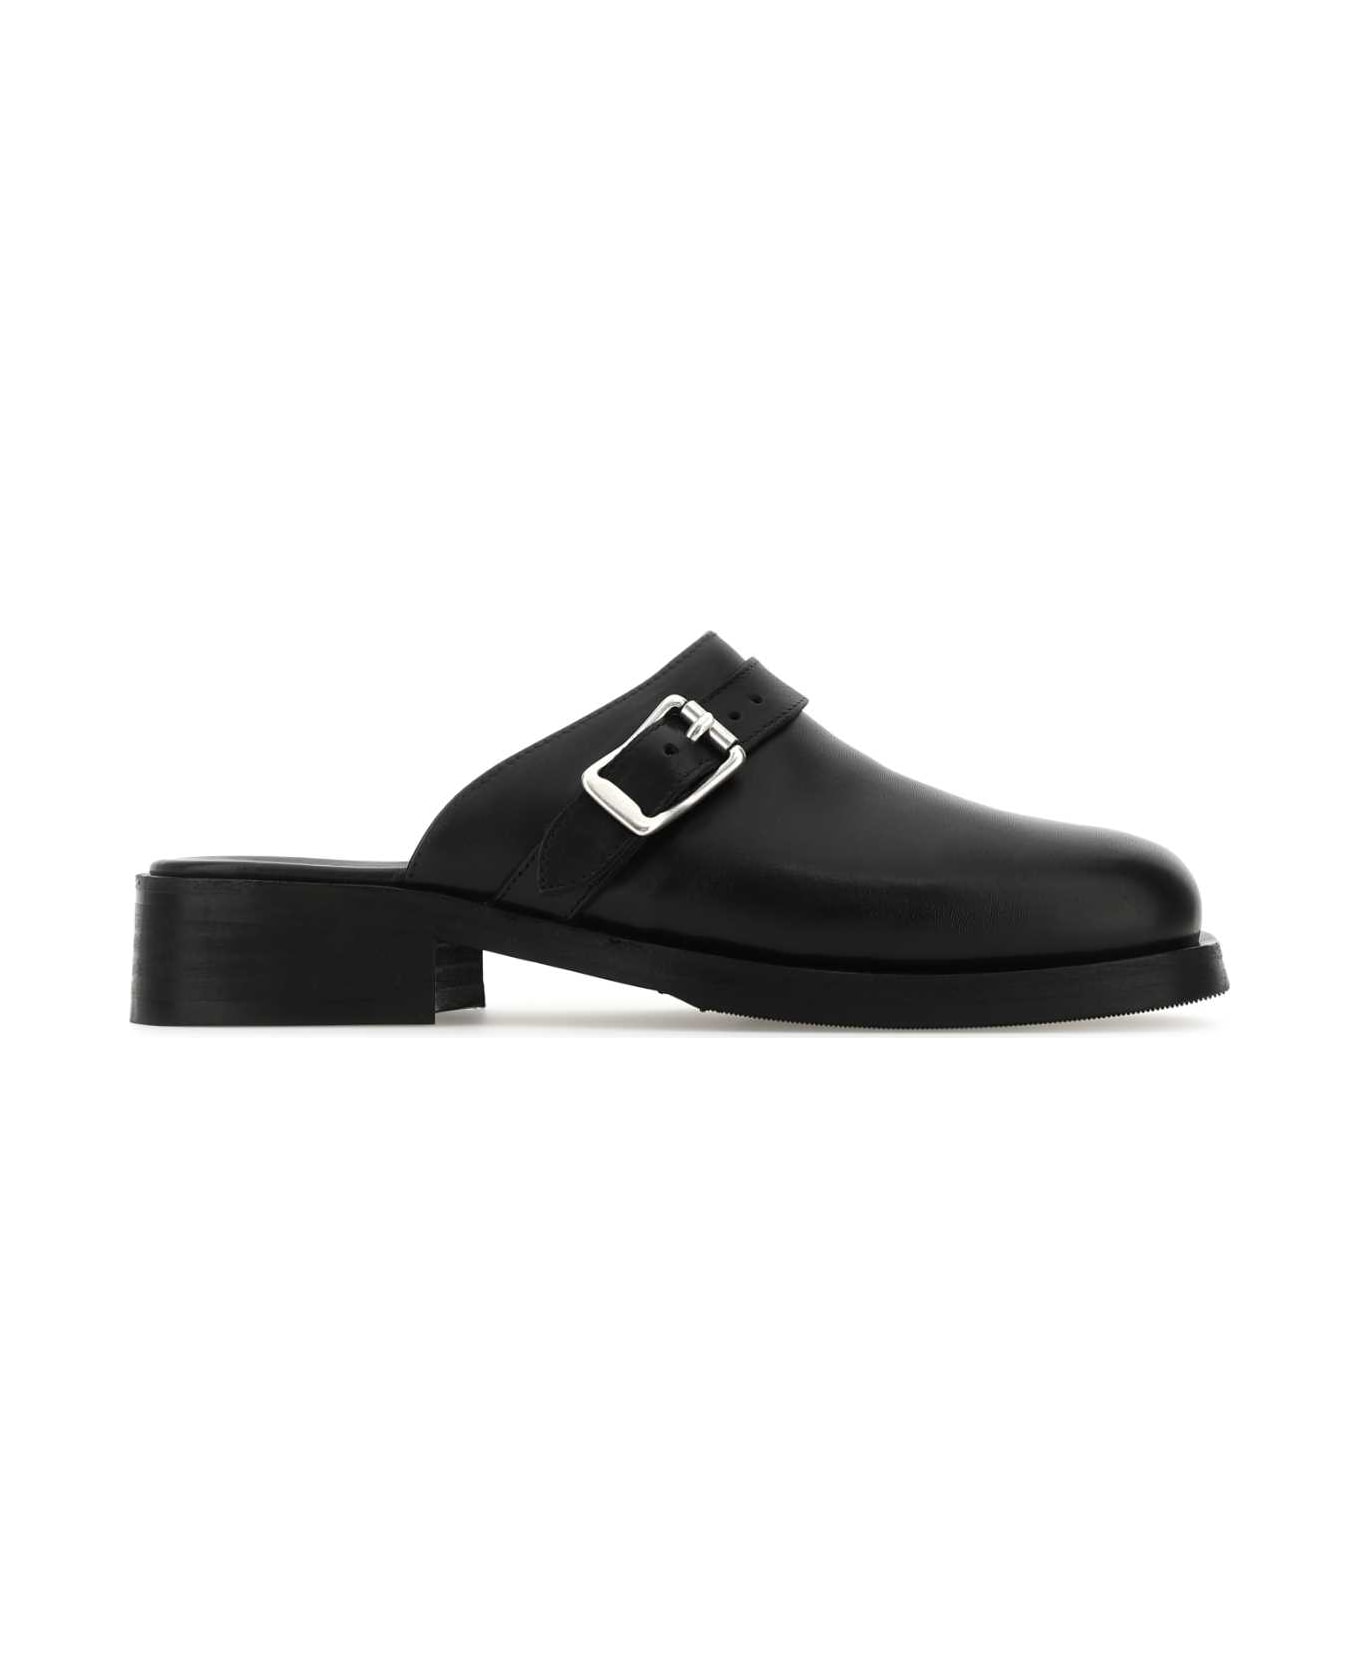 Our Legacy Black Leather Slippers - BLACKLEATHER